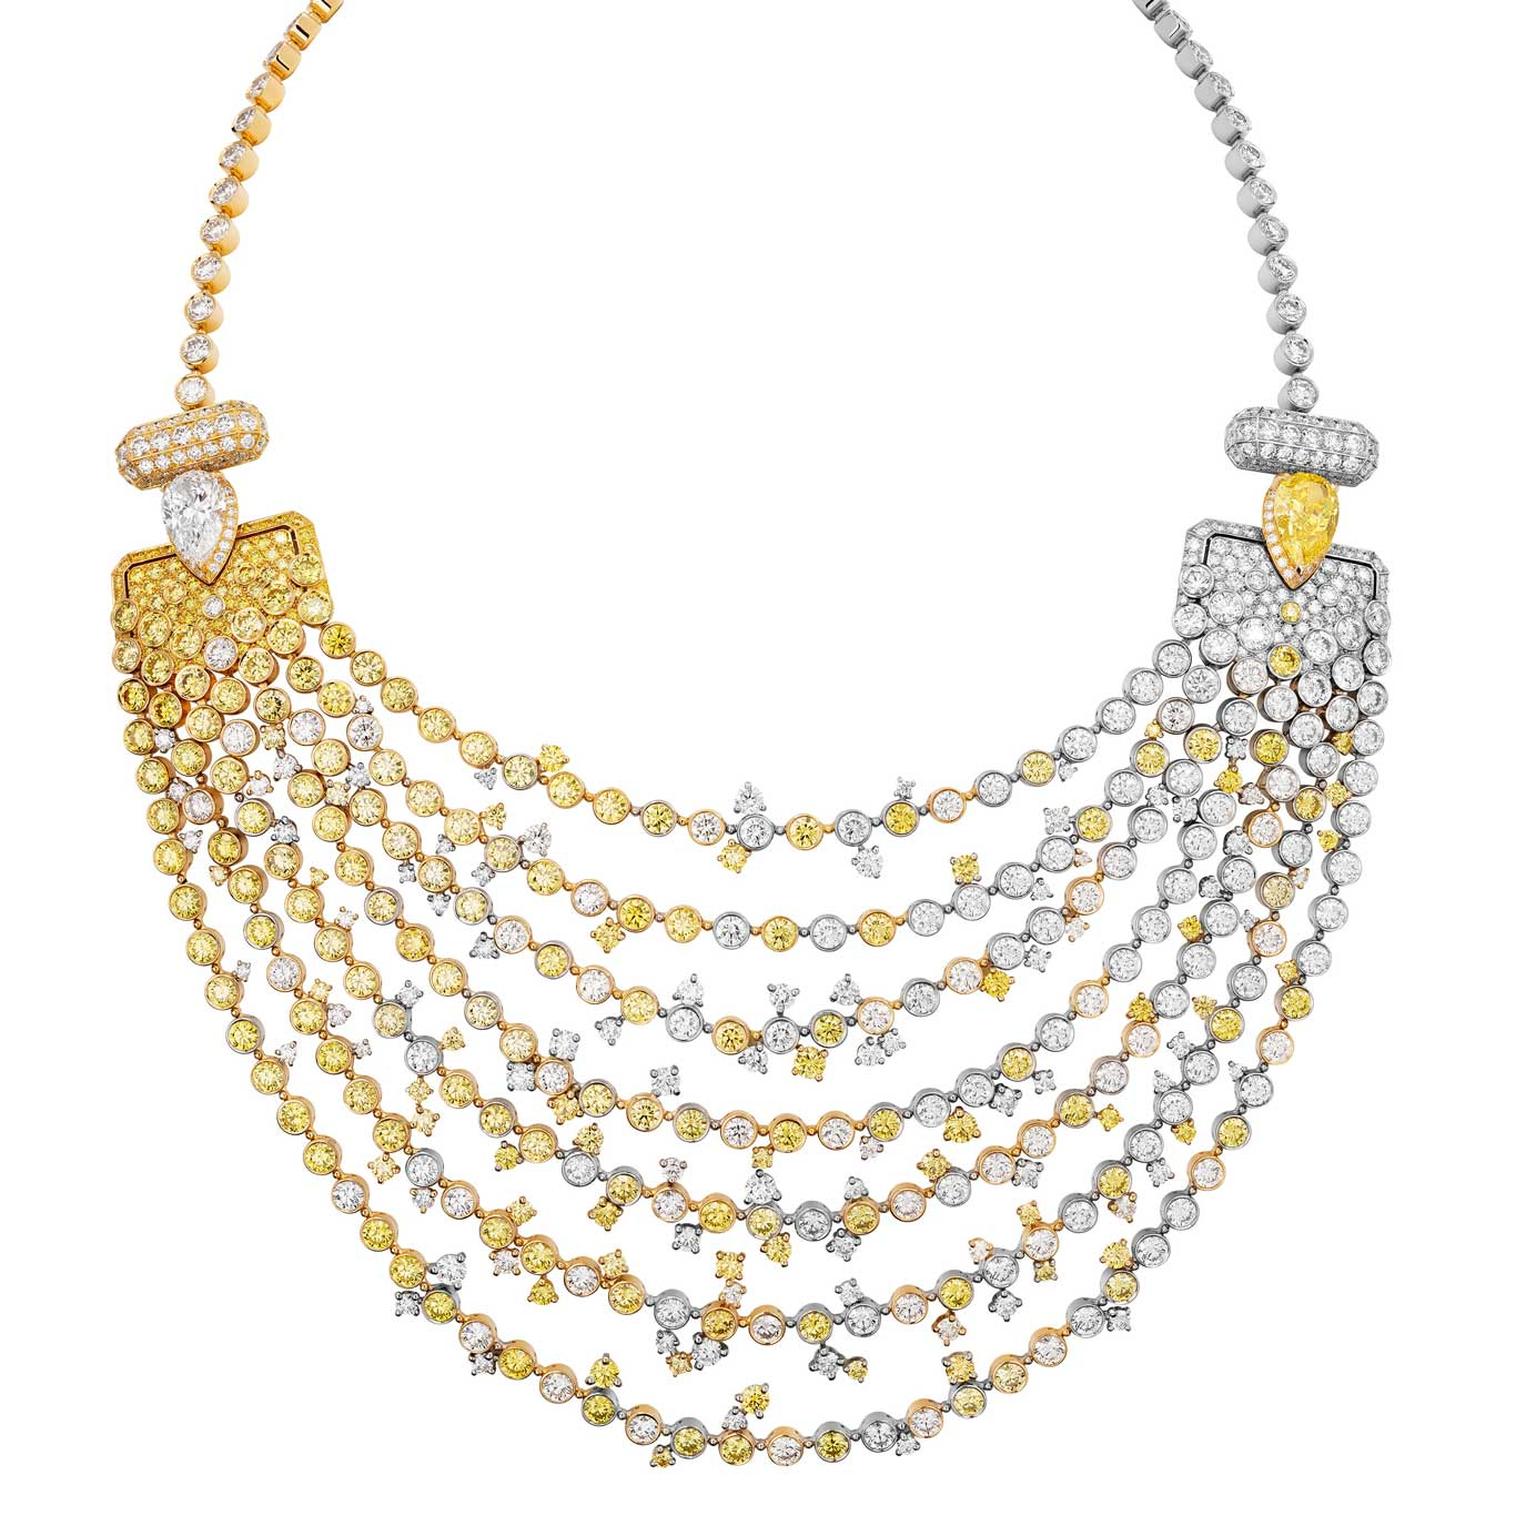 Chanel Collection No 5 Abstraction necklace, Chanel